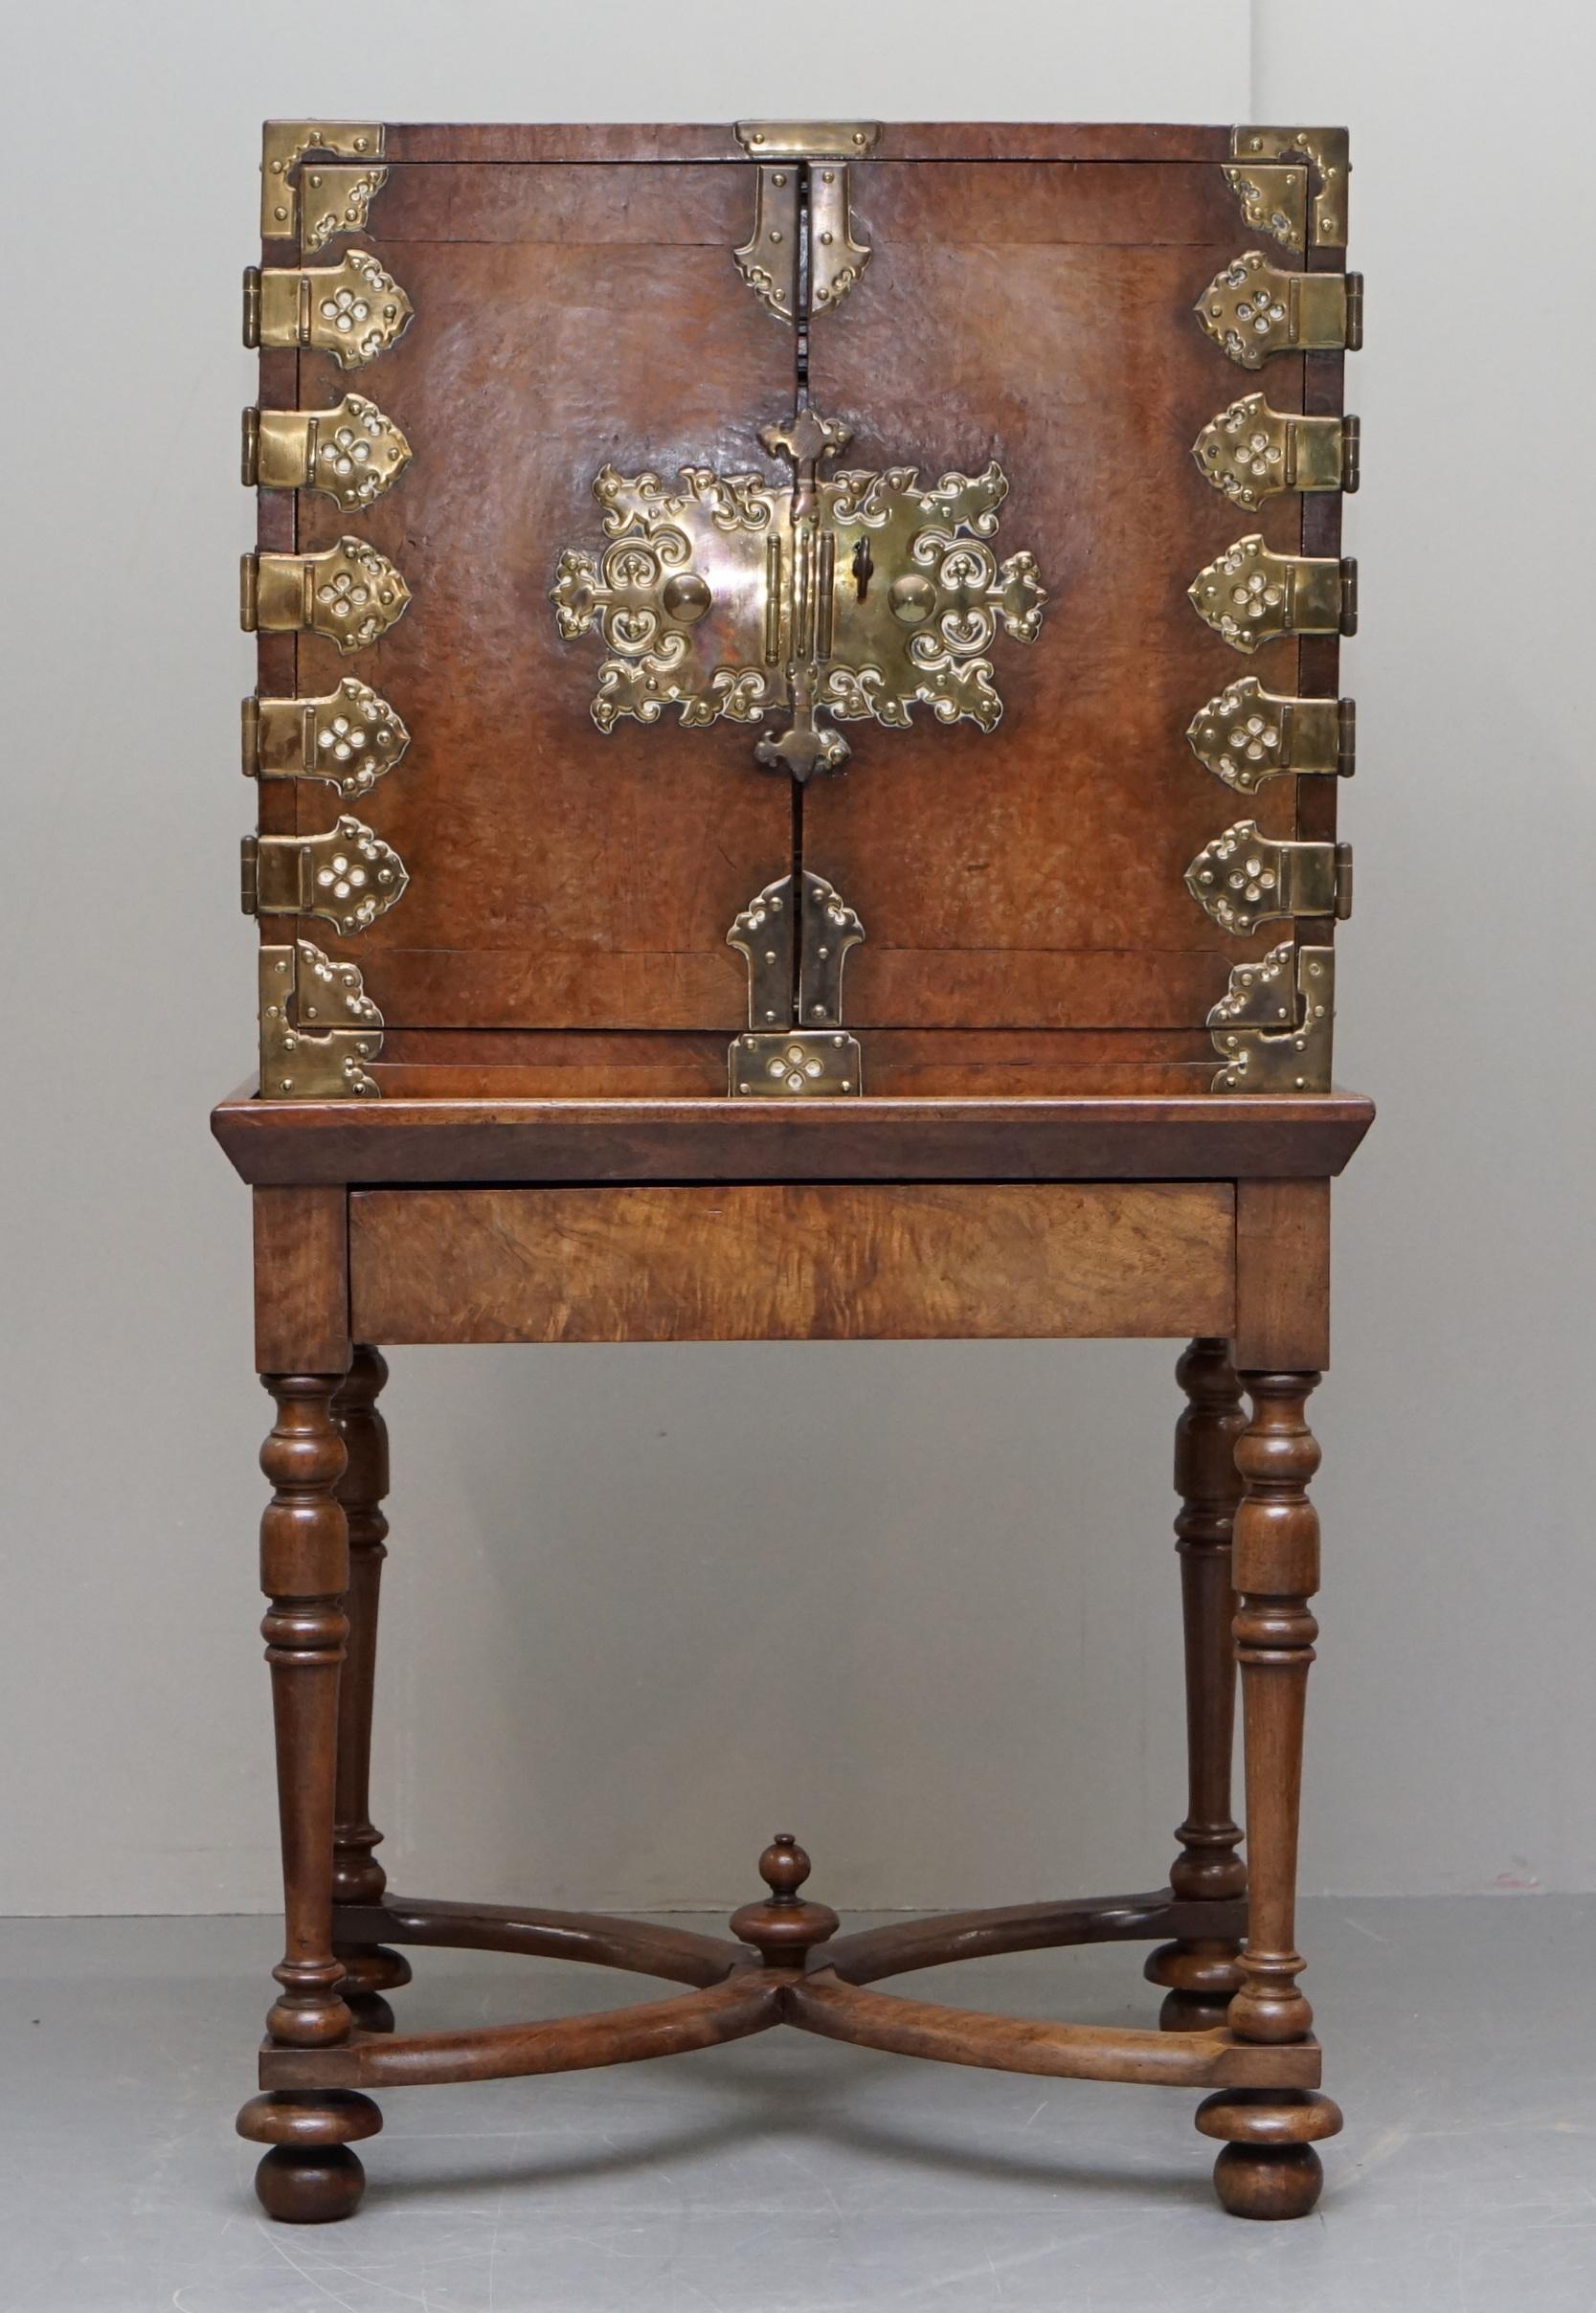 We are delighted to offer for sale this exceptionally rare 18th century circa 1740 Burr Walnut Portuguese east indies chest on stand 

A very fine and well made piece hence it has survived in sublime condition for the best part of 300 years. This